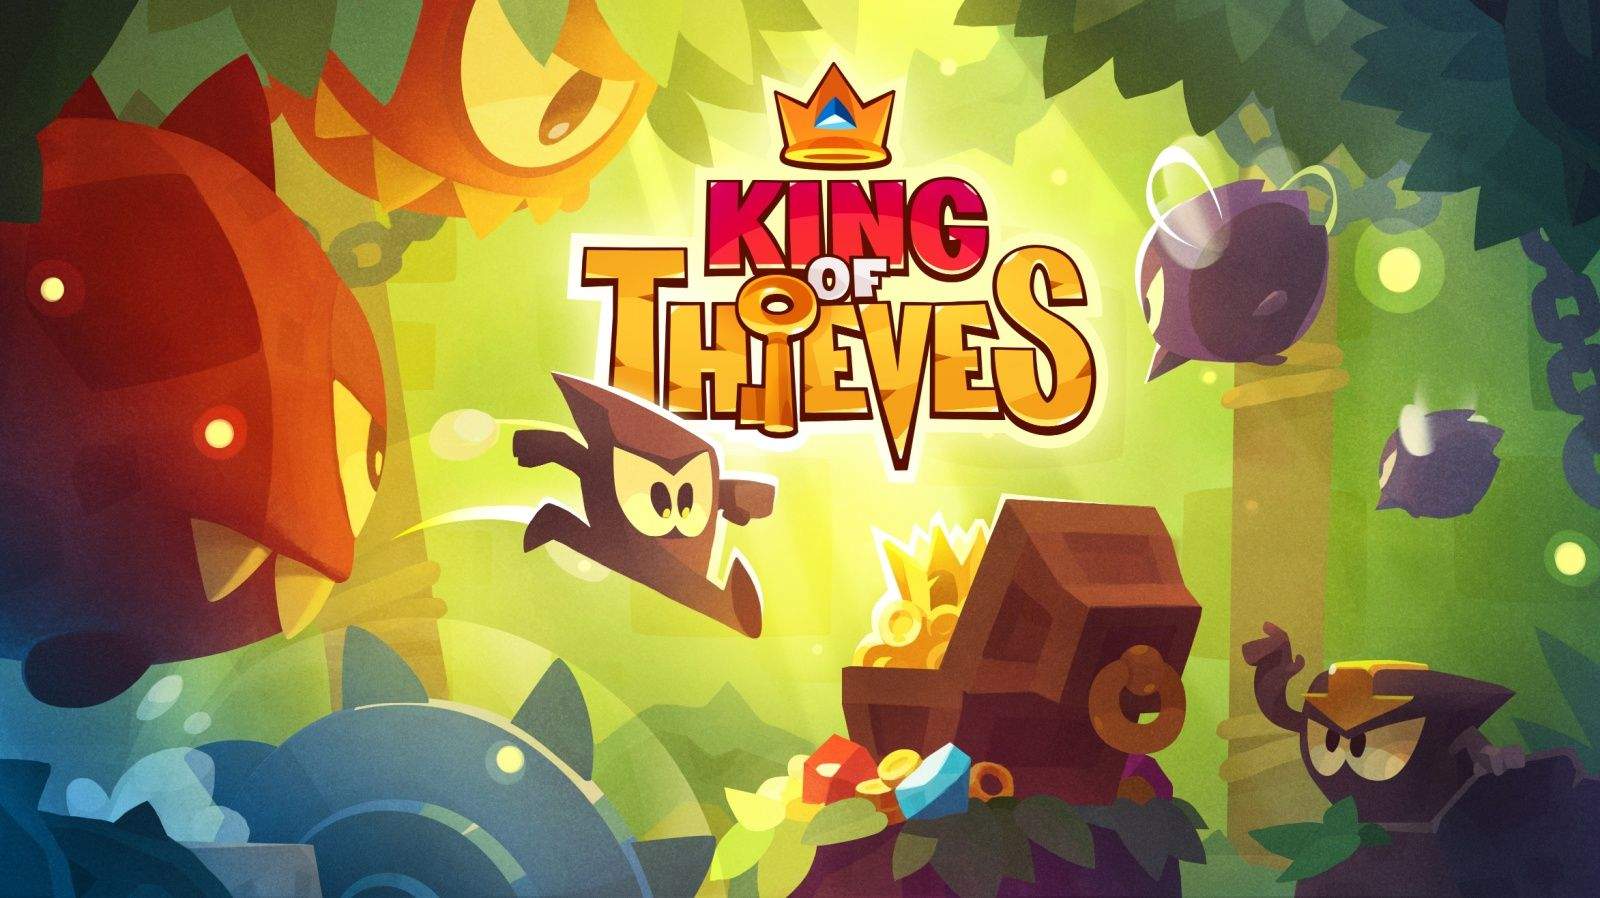 King of thieves app download